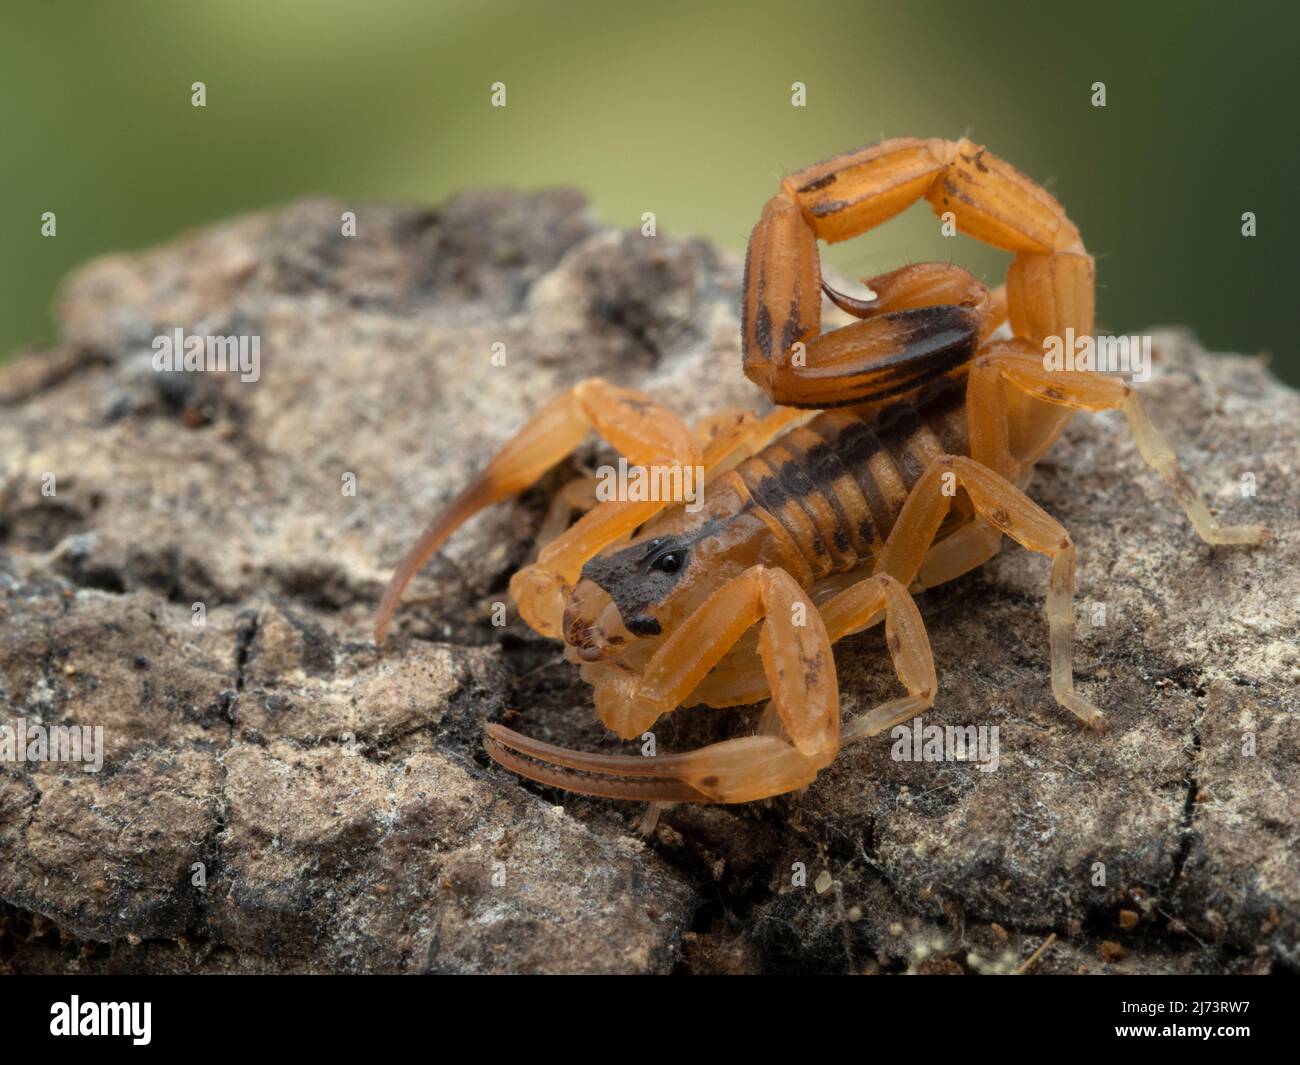 3/4 view of a tiny juvenile Brazilian scorpion (Tityus stigmurus) on a piece of bark. These scorpions are parthenogenetic: females give birth without Stock Photo